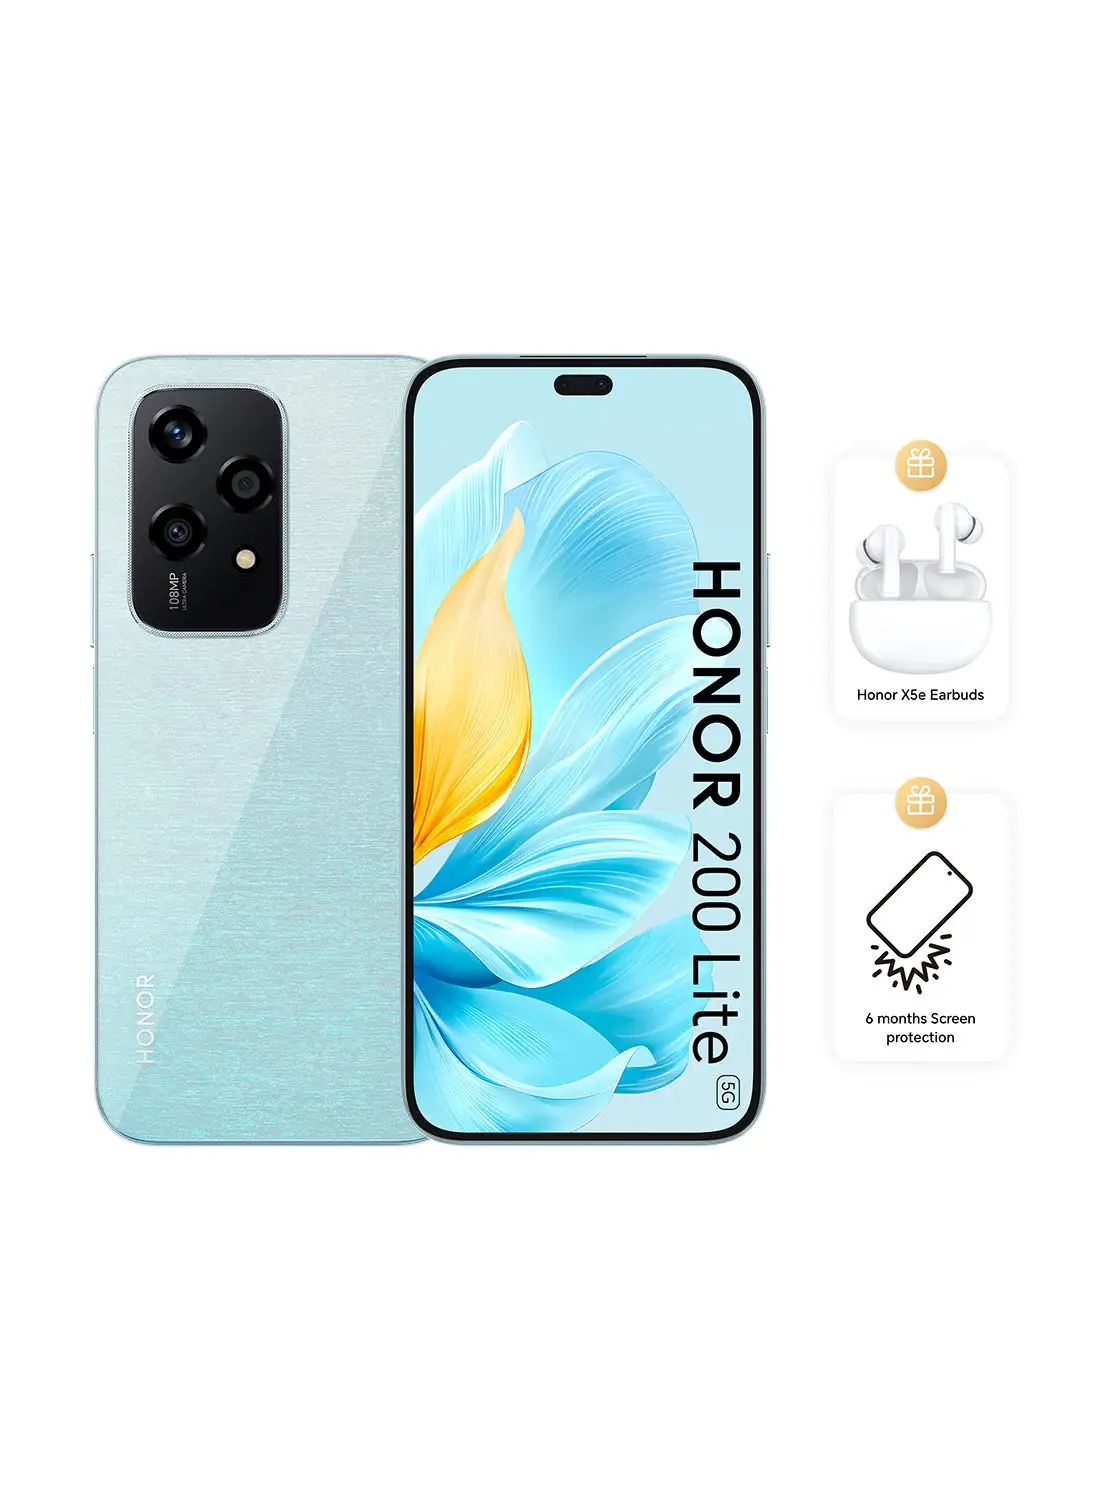 Honor 200 Lite 5G Dual SIM Starry Blue 8GB RAM + 256GB With Free Honor X5e Earbuds And 6 Month Screen Protection - Middle East Version